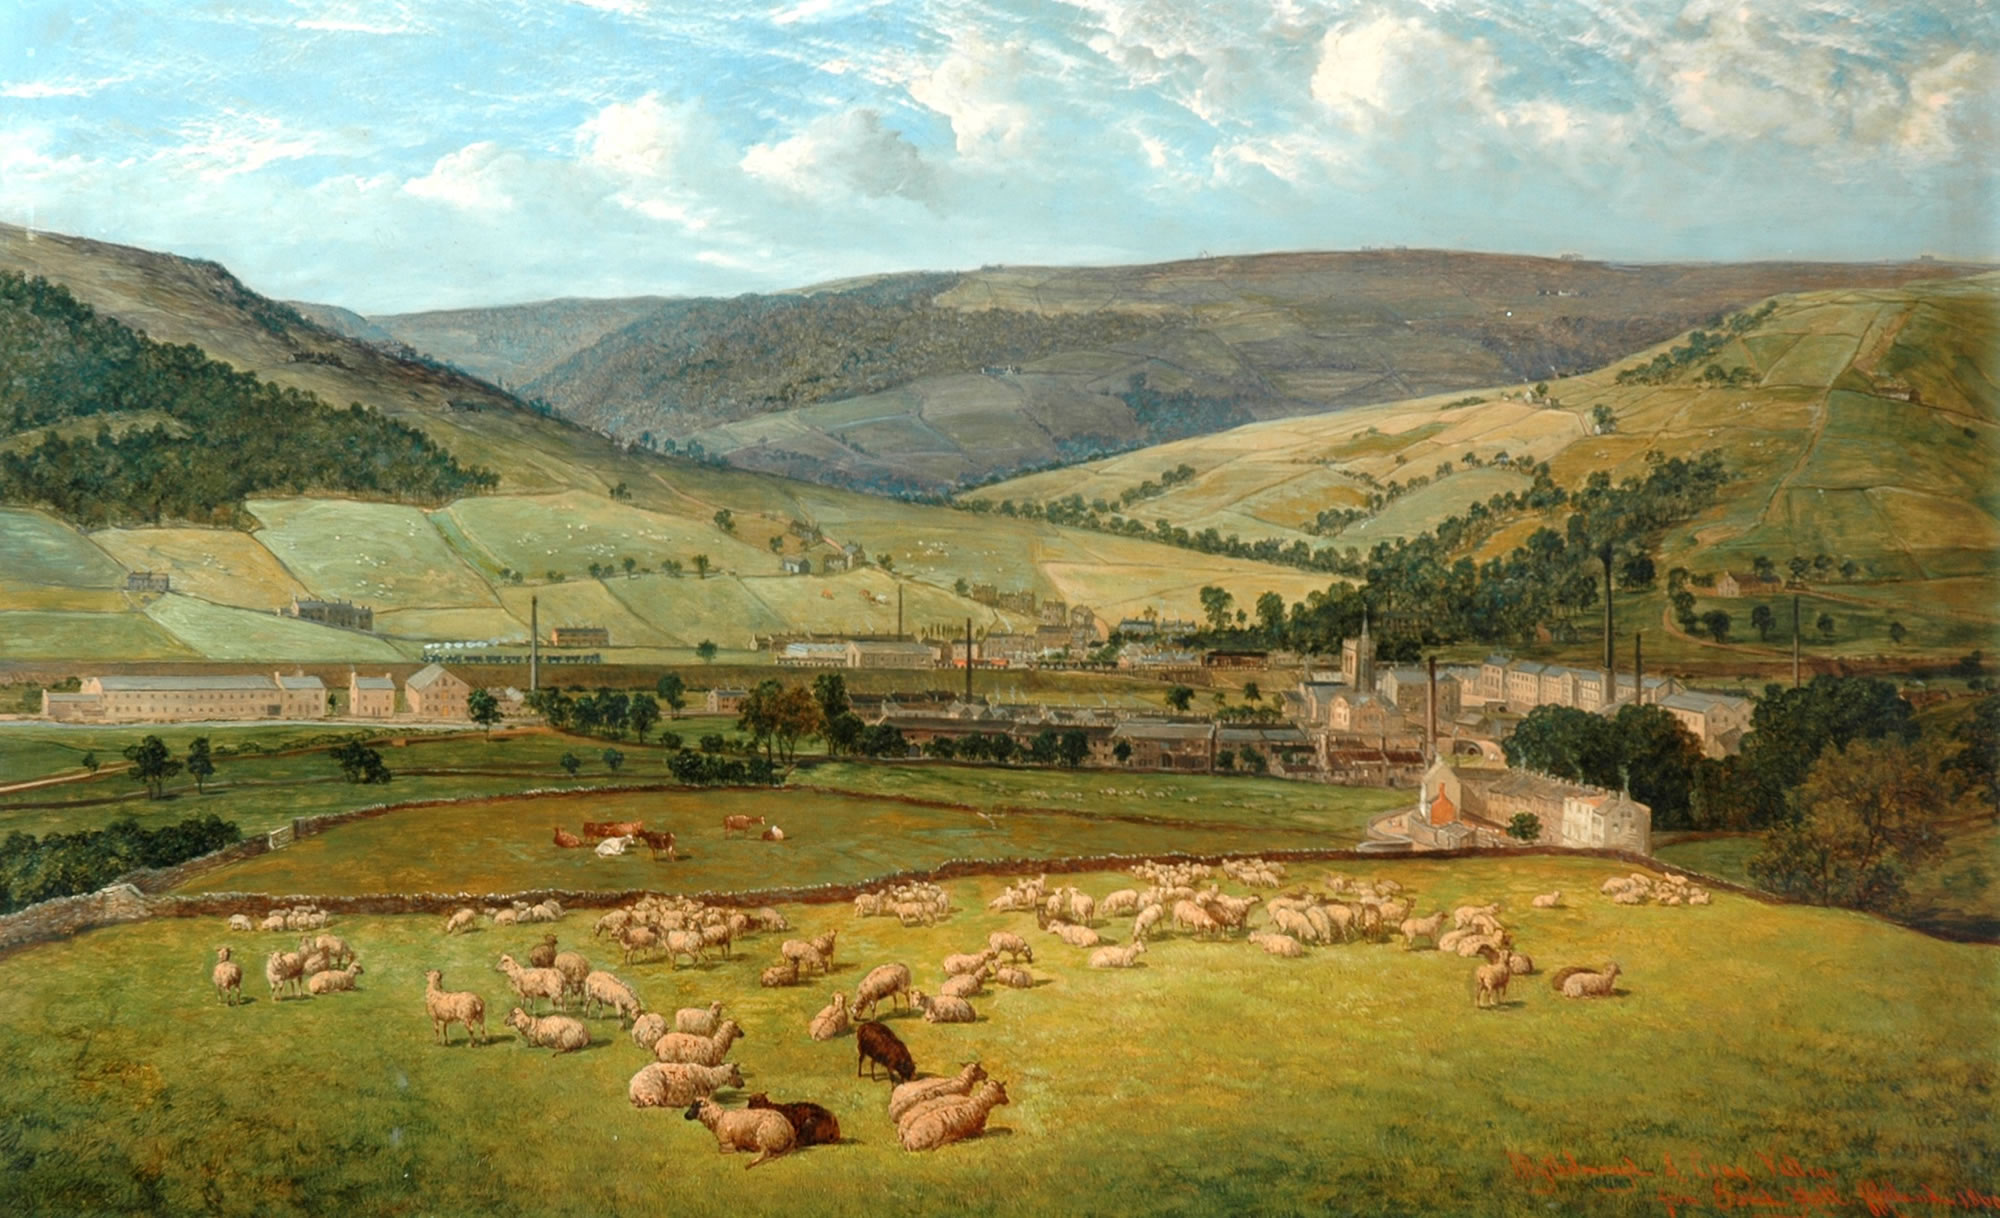 Image name calderdale mytholmroyd amd cragg valley from ewood hall john holland 1869 the 14 image from the post We are West Yorkshire in Yorkshire.com.